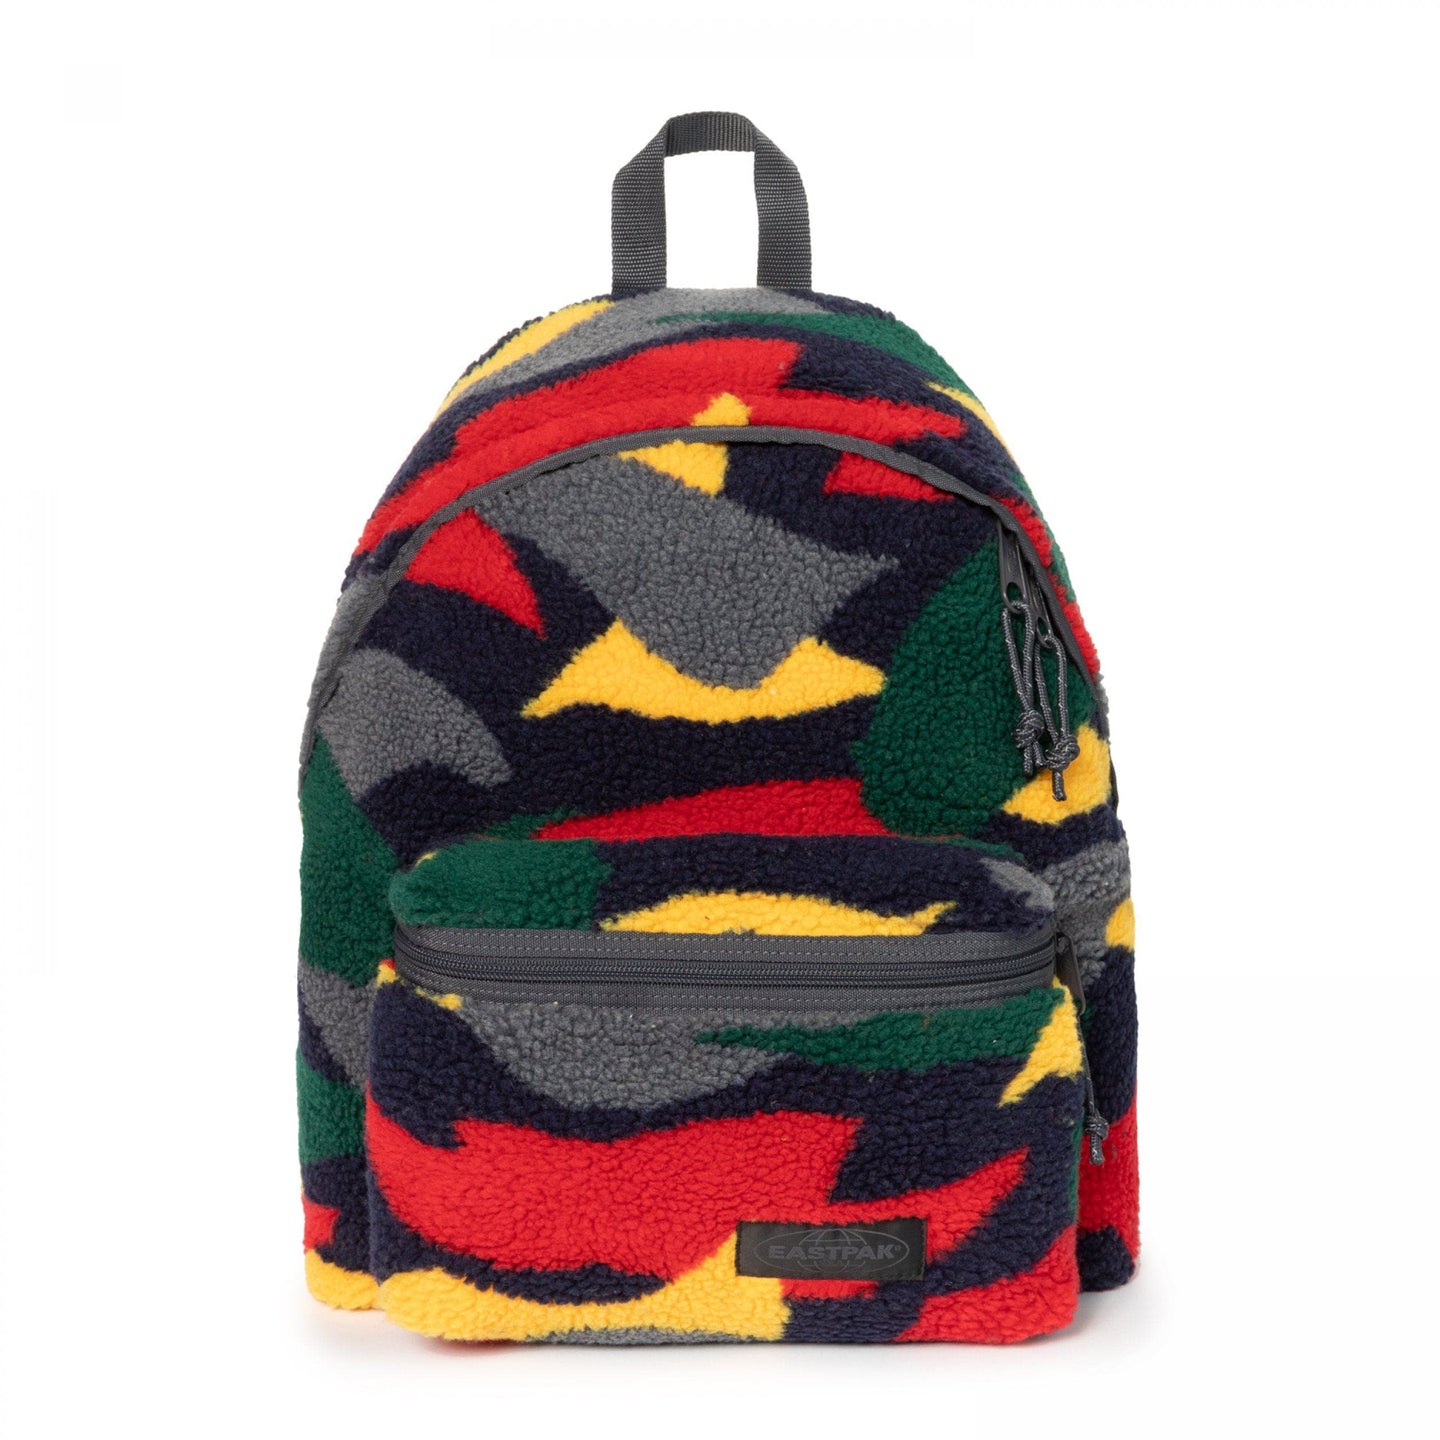 Padded Pak'r Shearling Camo Backpack front view